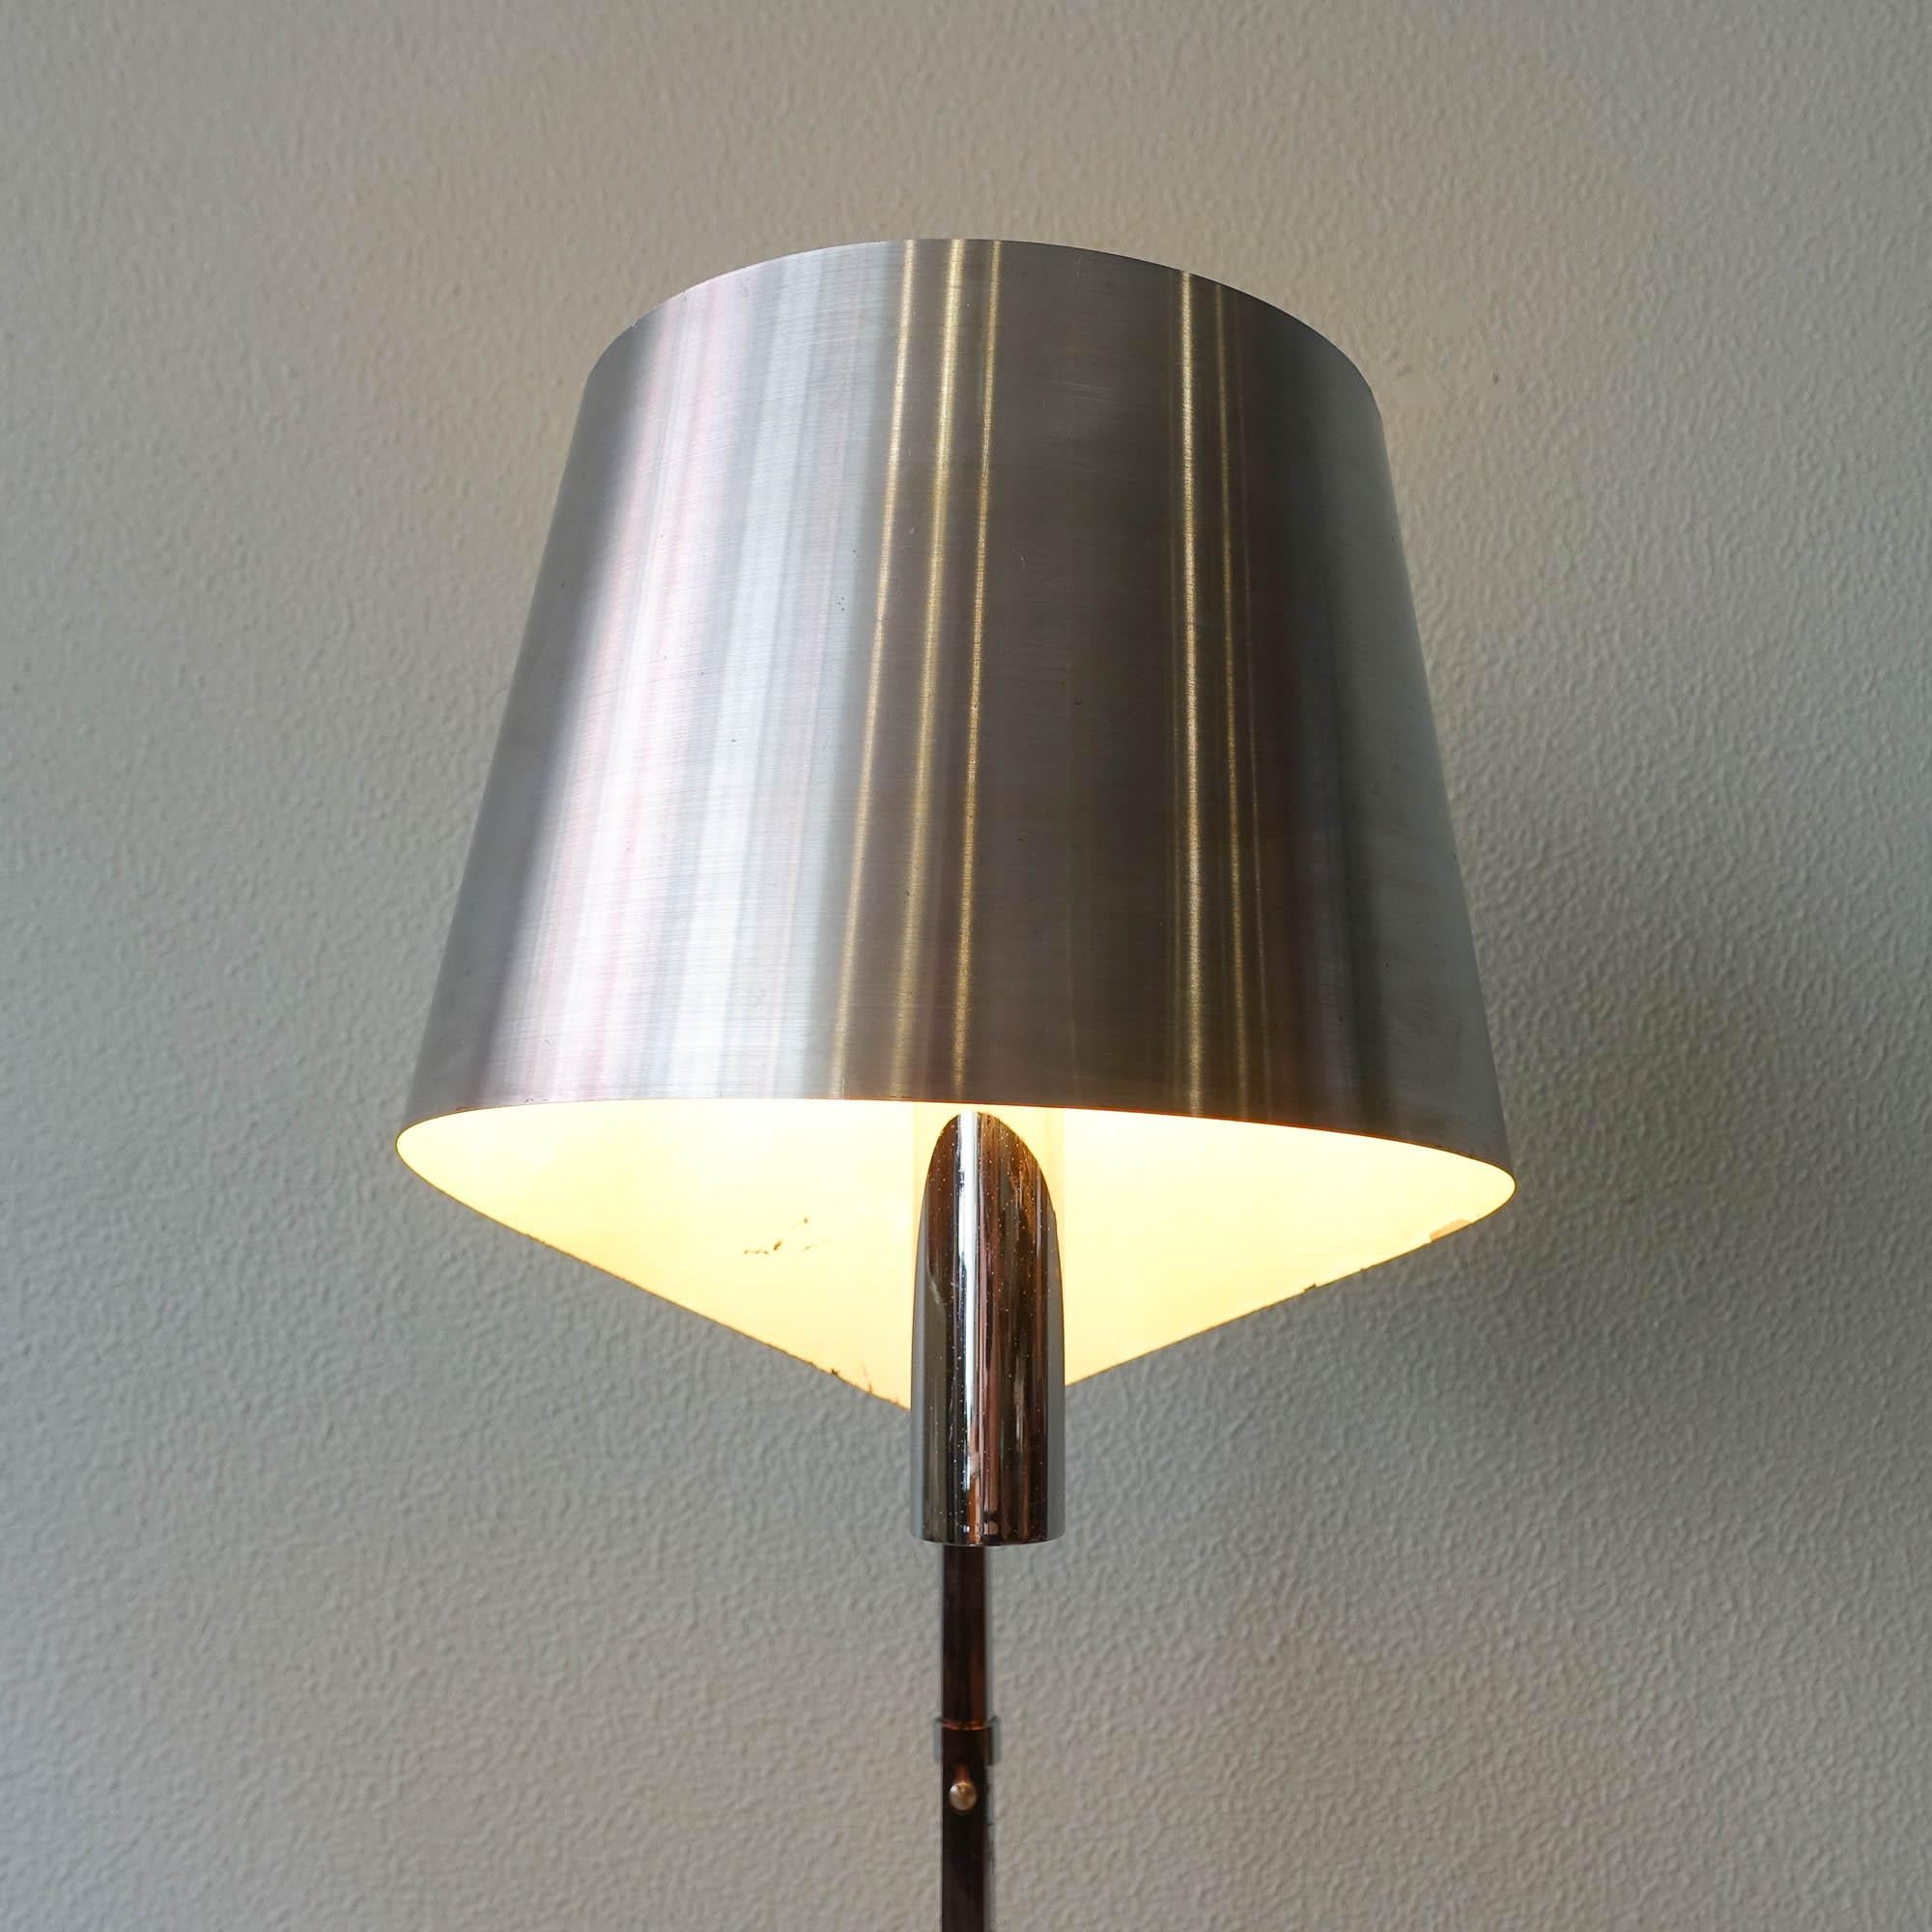 Mid-20th Century French Sculptural Floor Lamp 